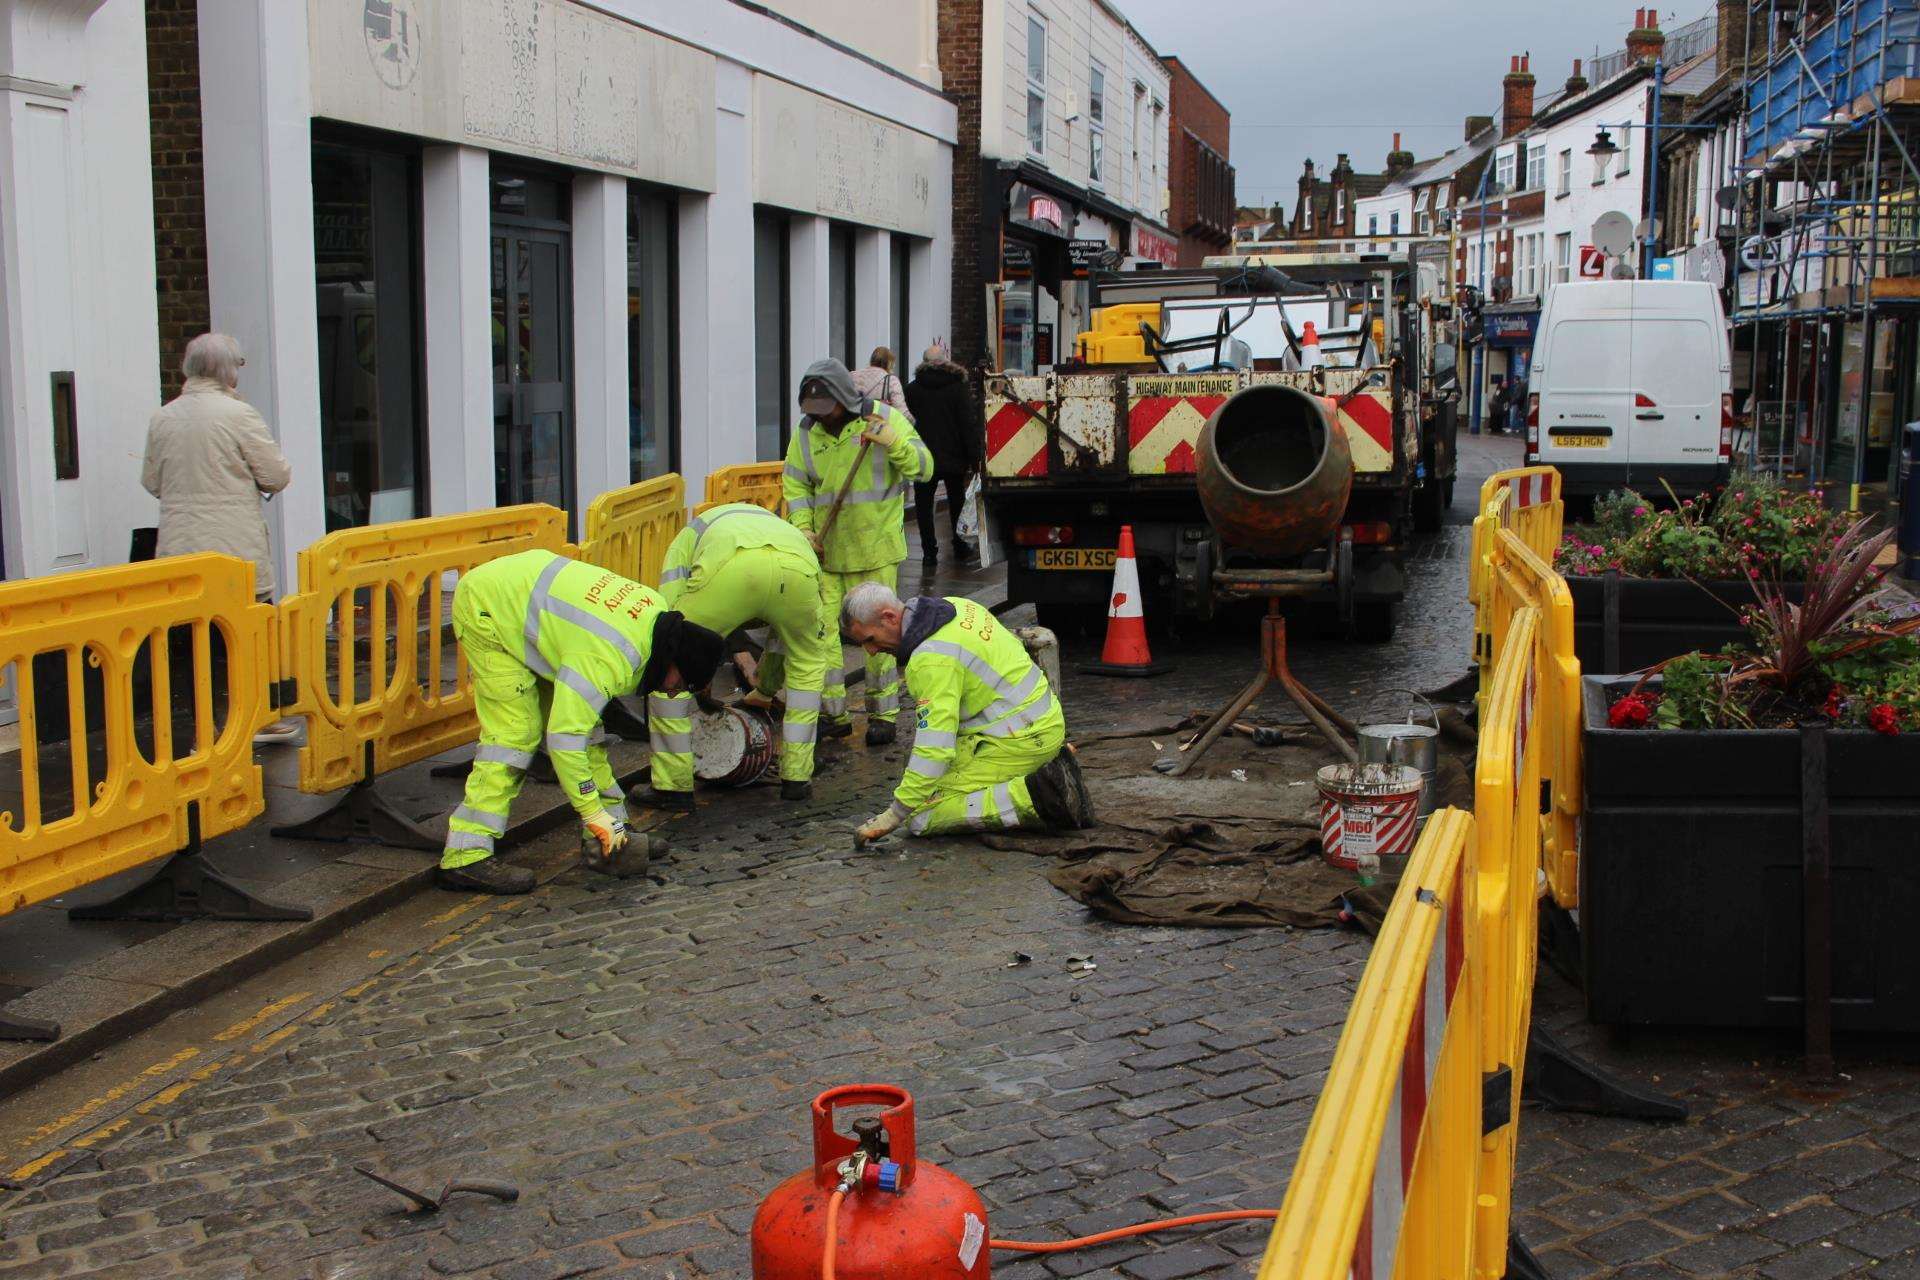 Sheerness High Street was closed for two weeks in October and November to replace drain covers and reset cobbles (5960367)